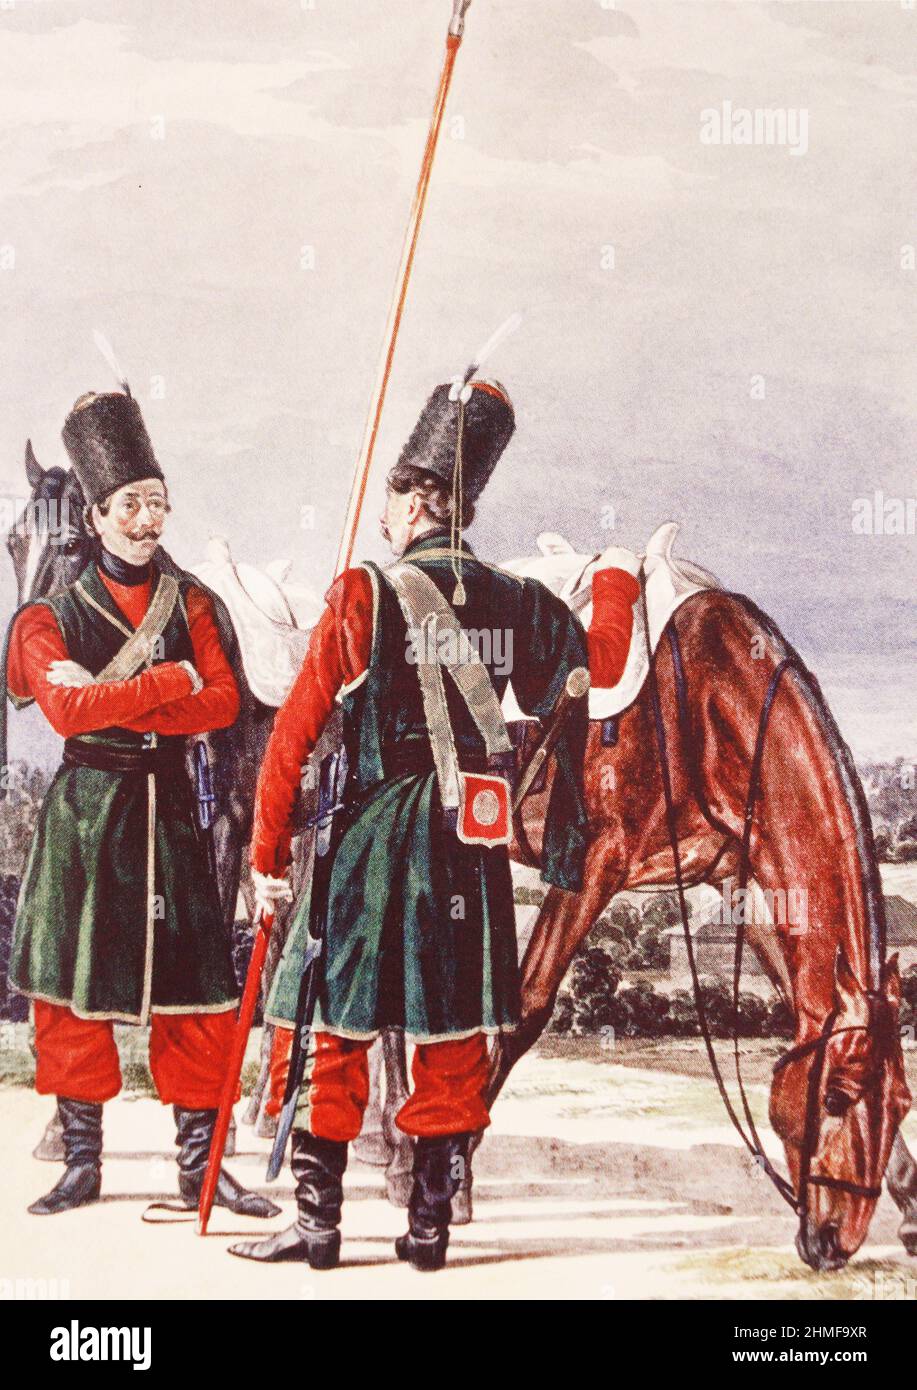 Officer and Cossack of the Cossack escort teams. Engraving from the 1790s. Stock Photo